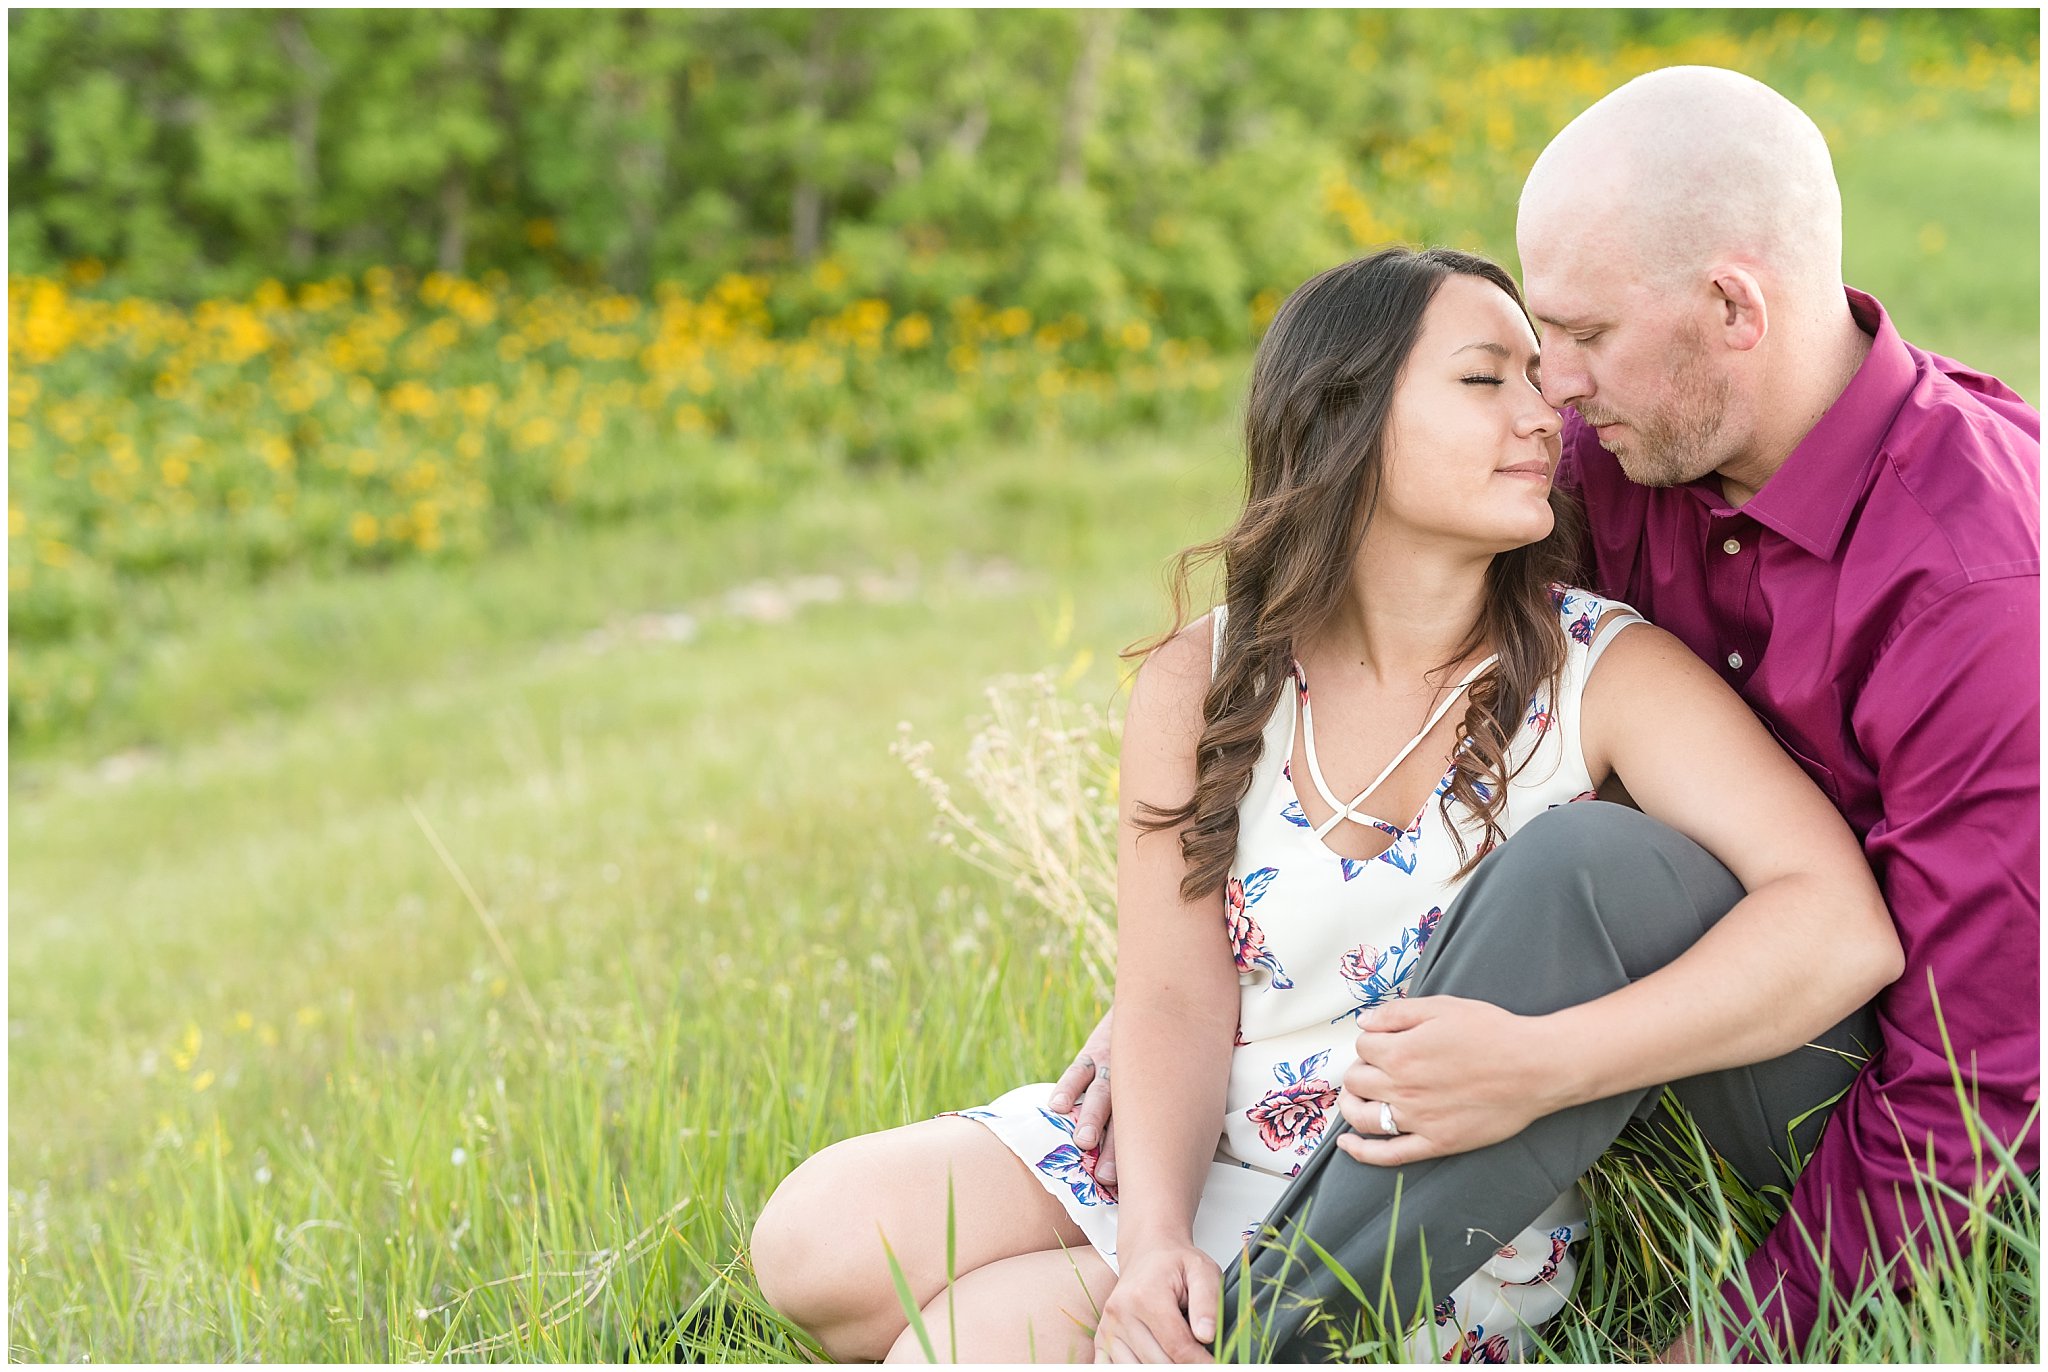 Romantic couple engagement session with mountains in the background and wildflowers | Snowbasin Utah Engagements